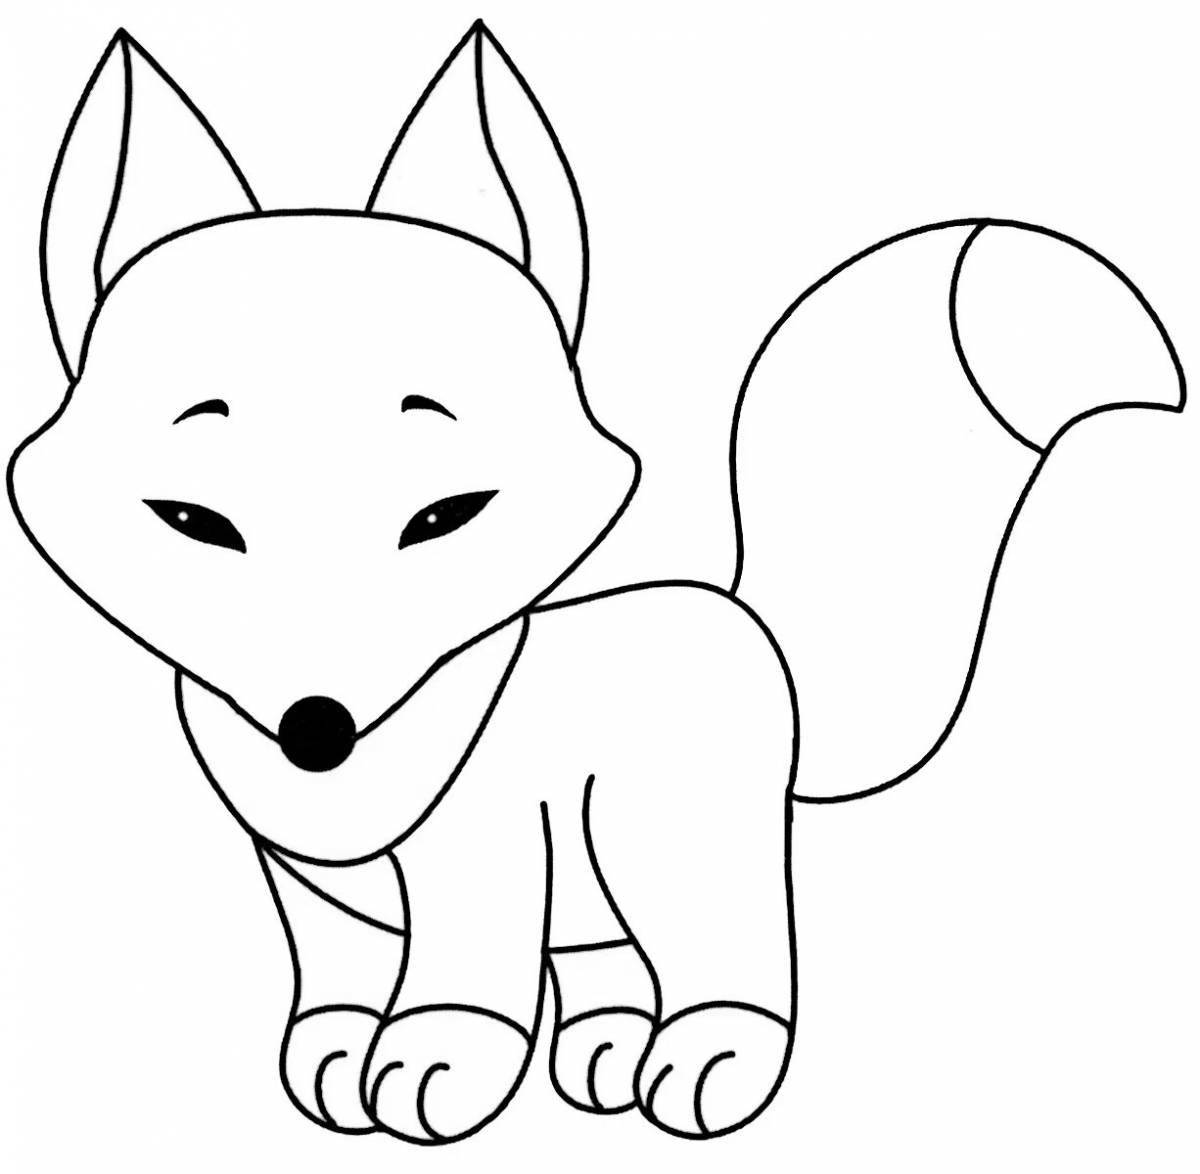 Fox live coloring for kids